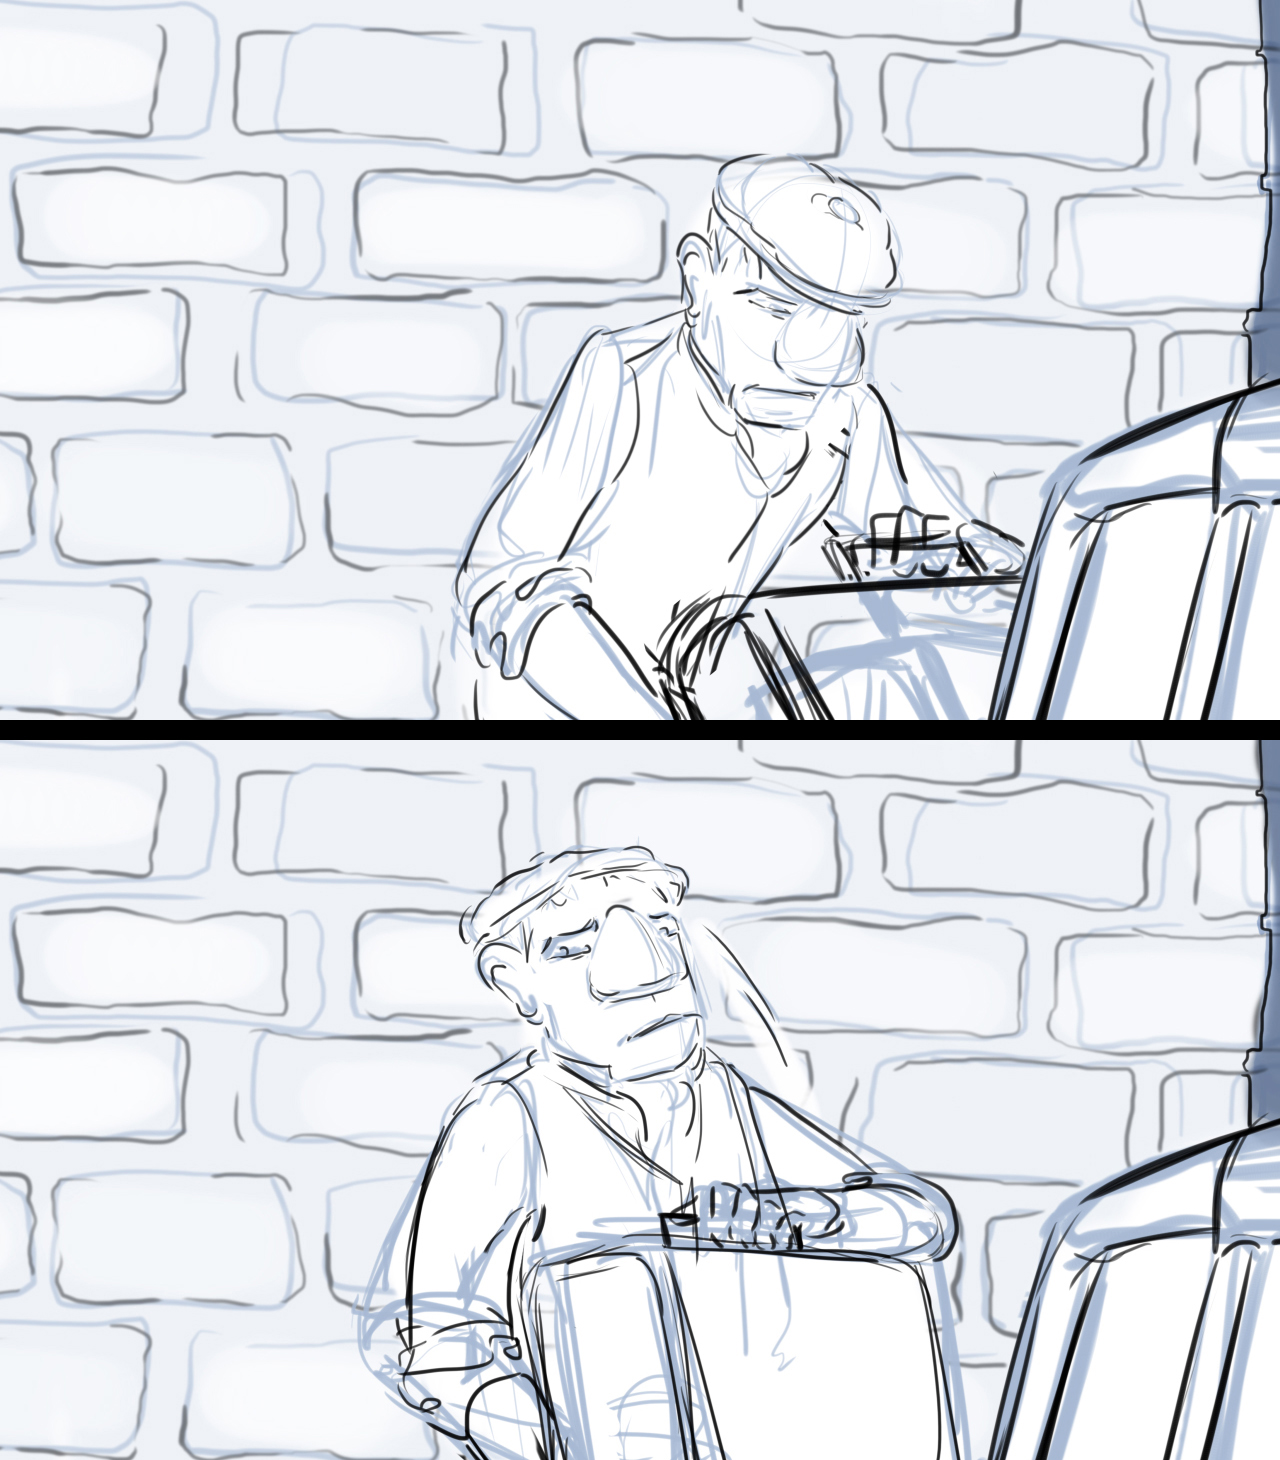 Storyboard sequence from an animated film. Sequence shows man holding suitcase looking up.